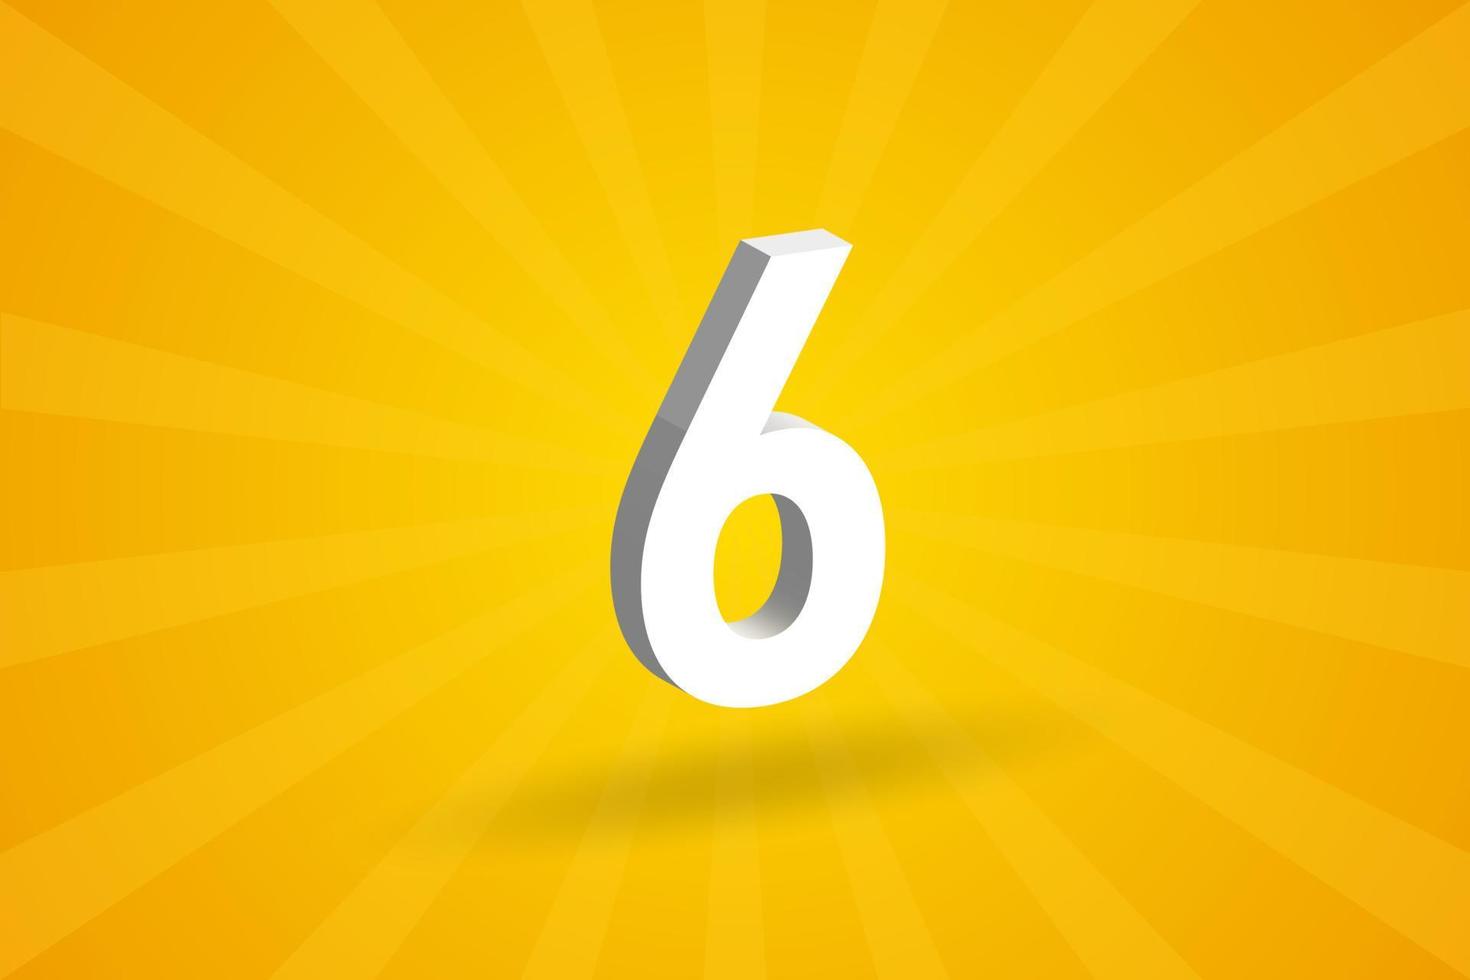 3D 6 number font alphabet. White 3D Number 6 with yellow background vector